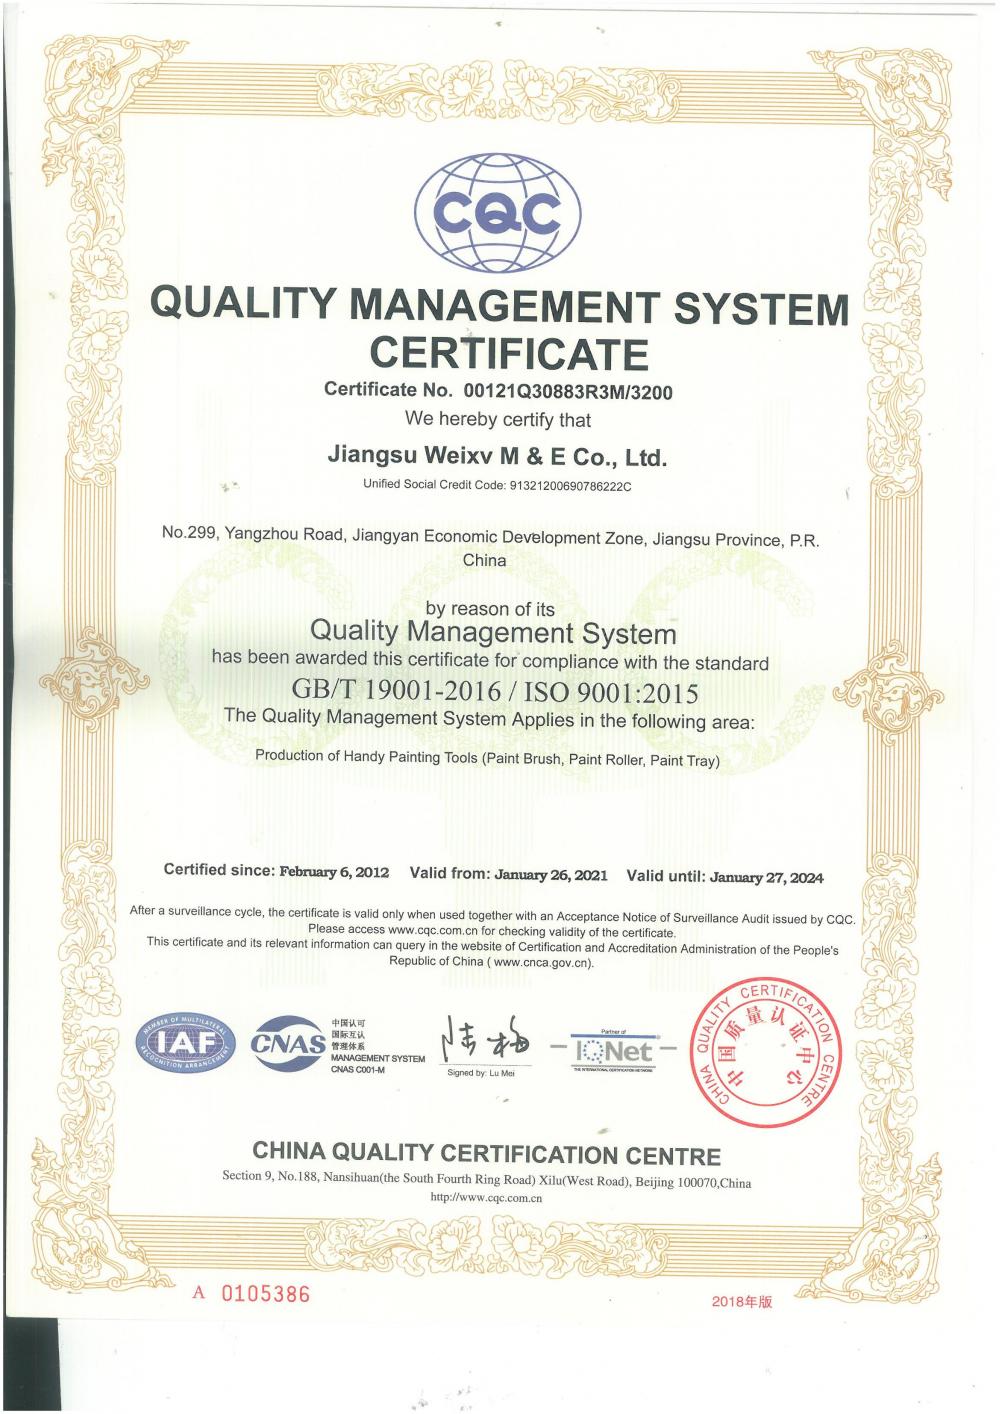 Global Recycled Standard Certificate 3